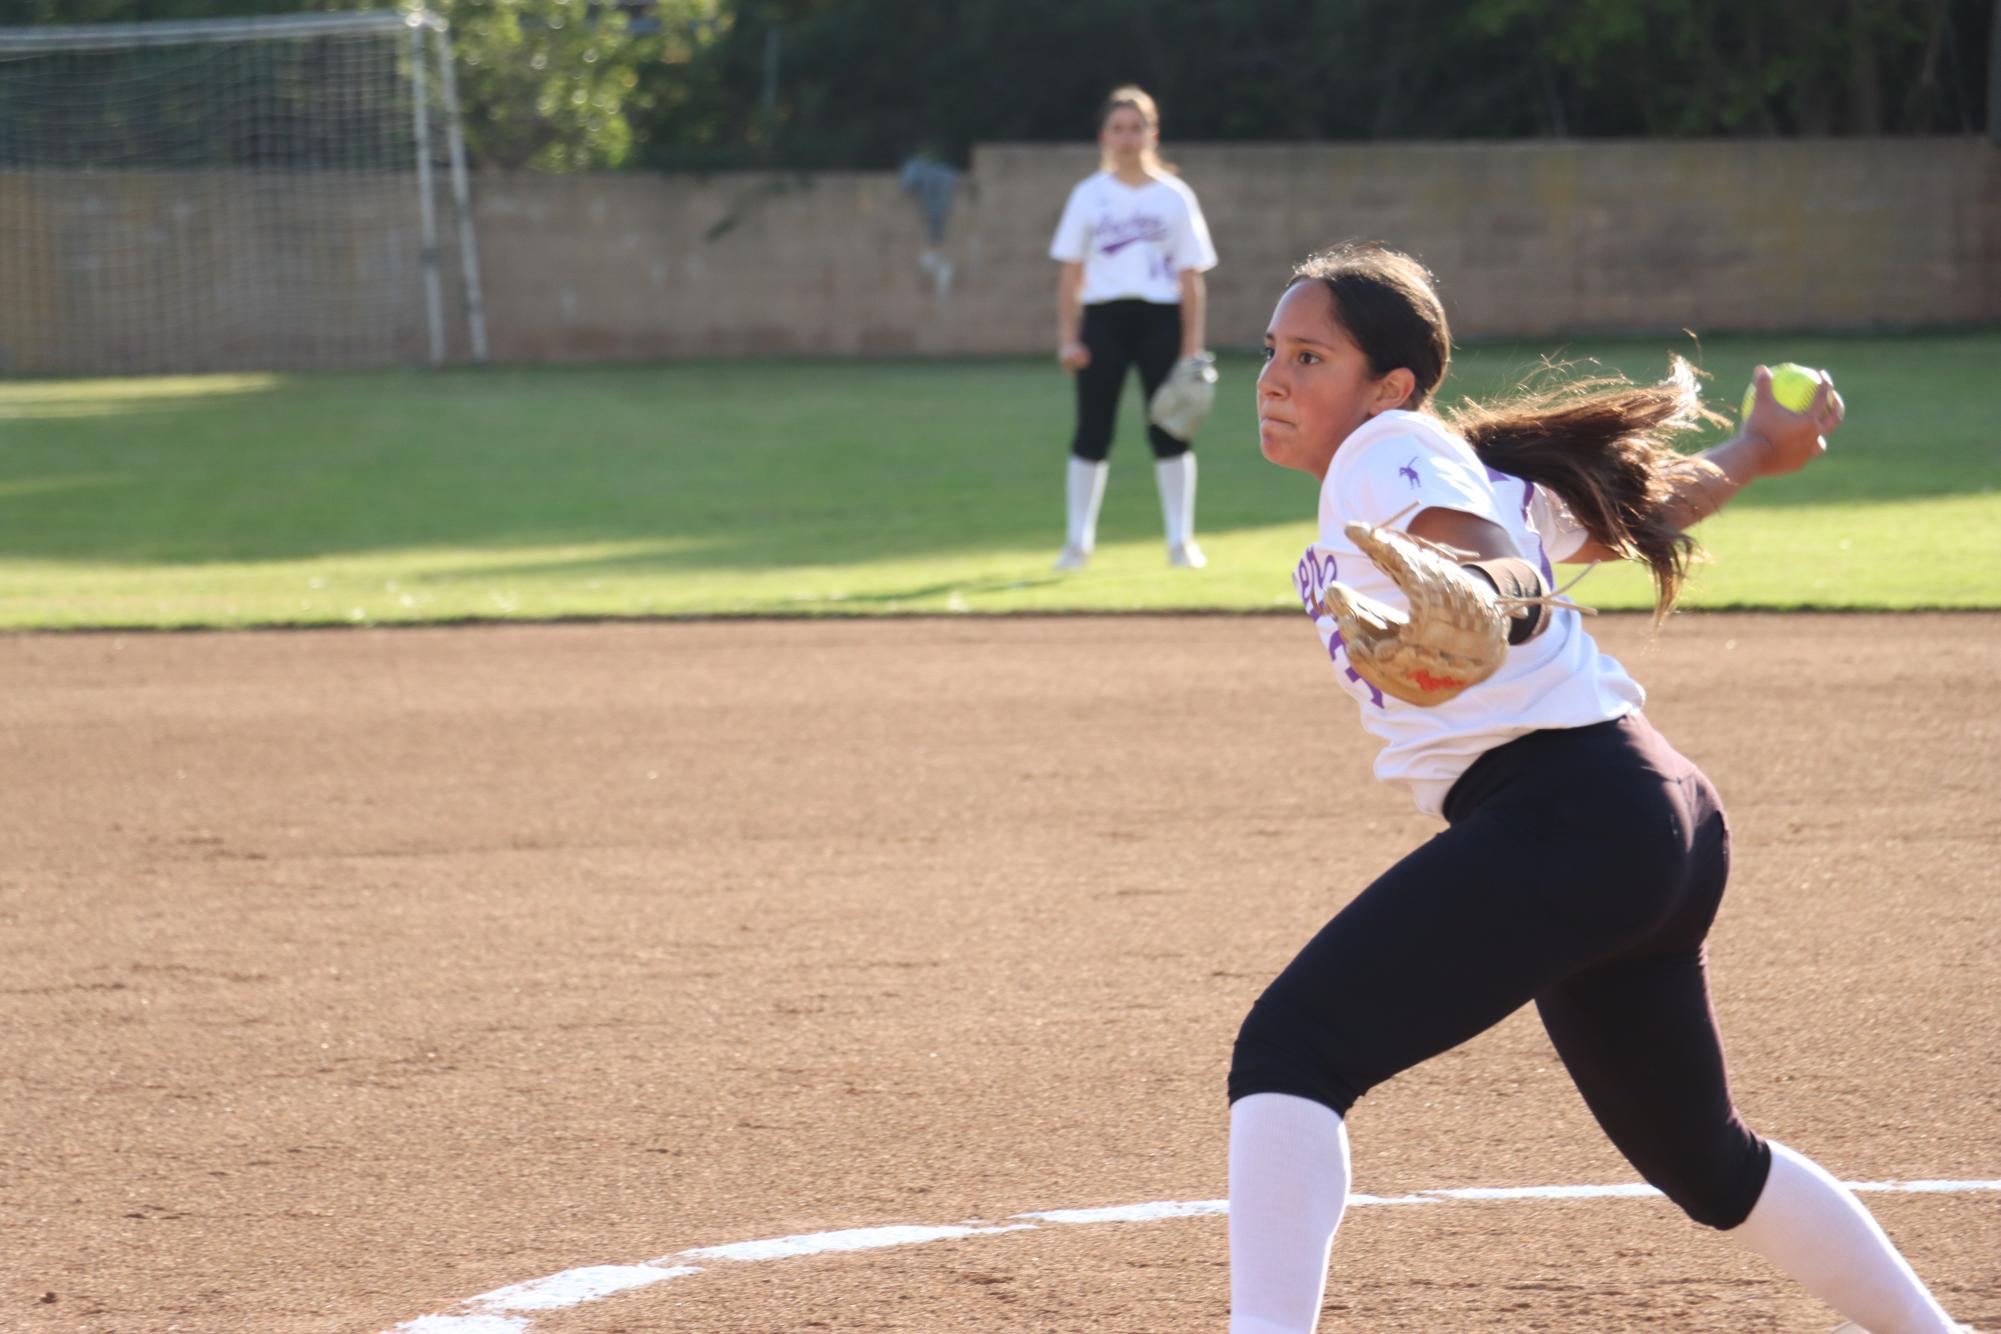 Andrea Fuentes: Inspiring Leadership and Resilience in Middle School Softball